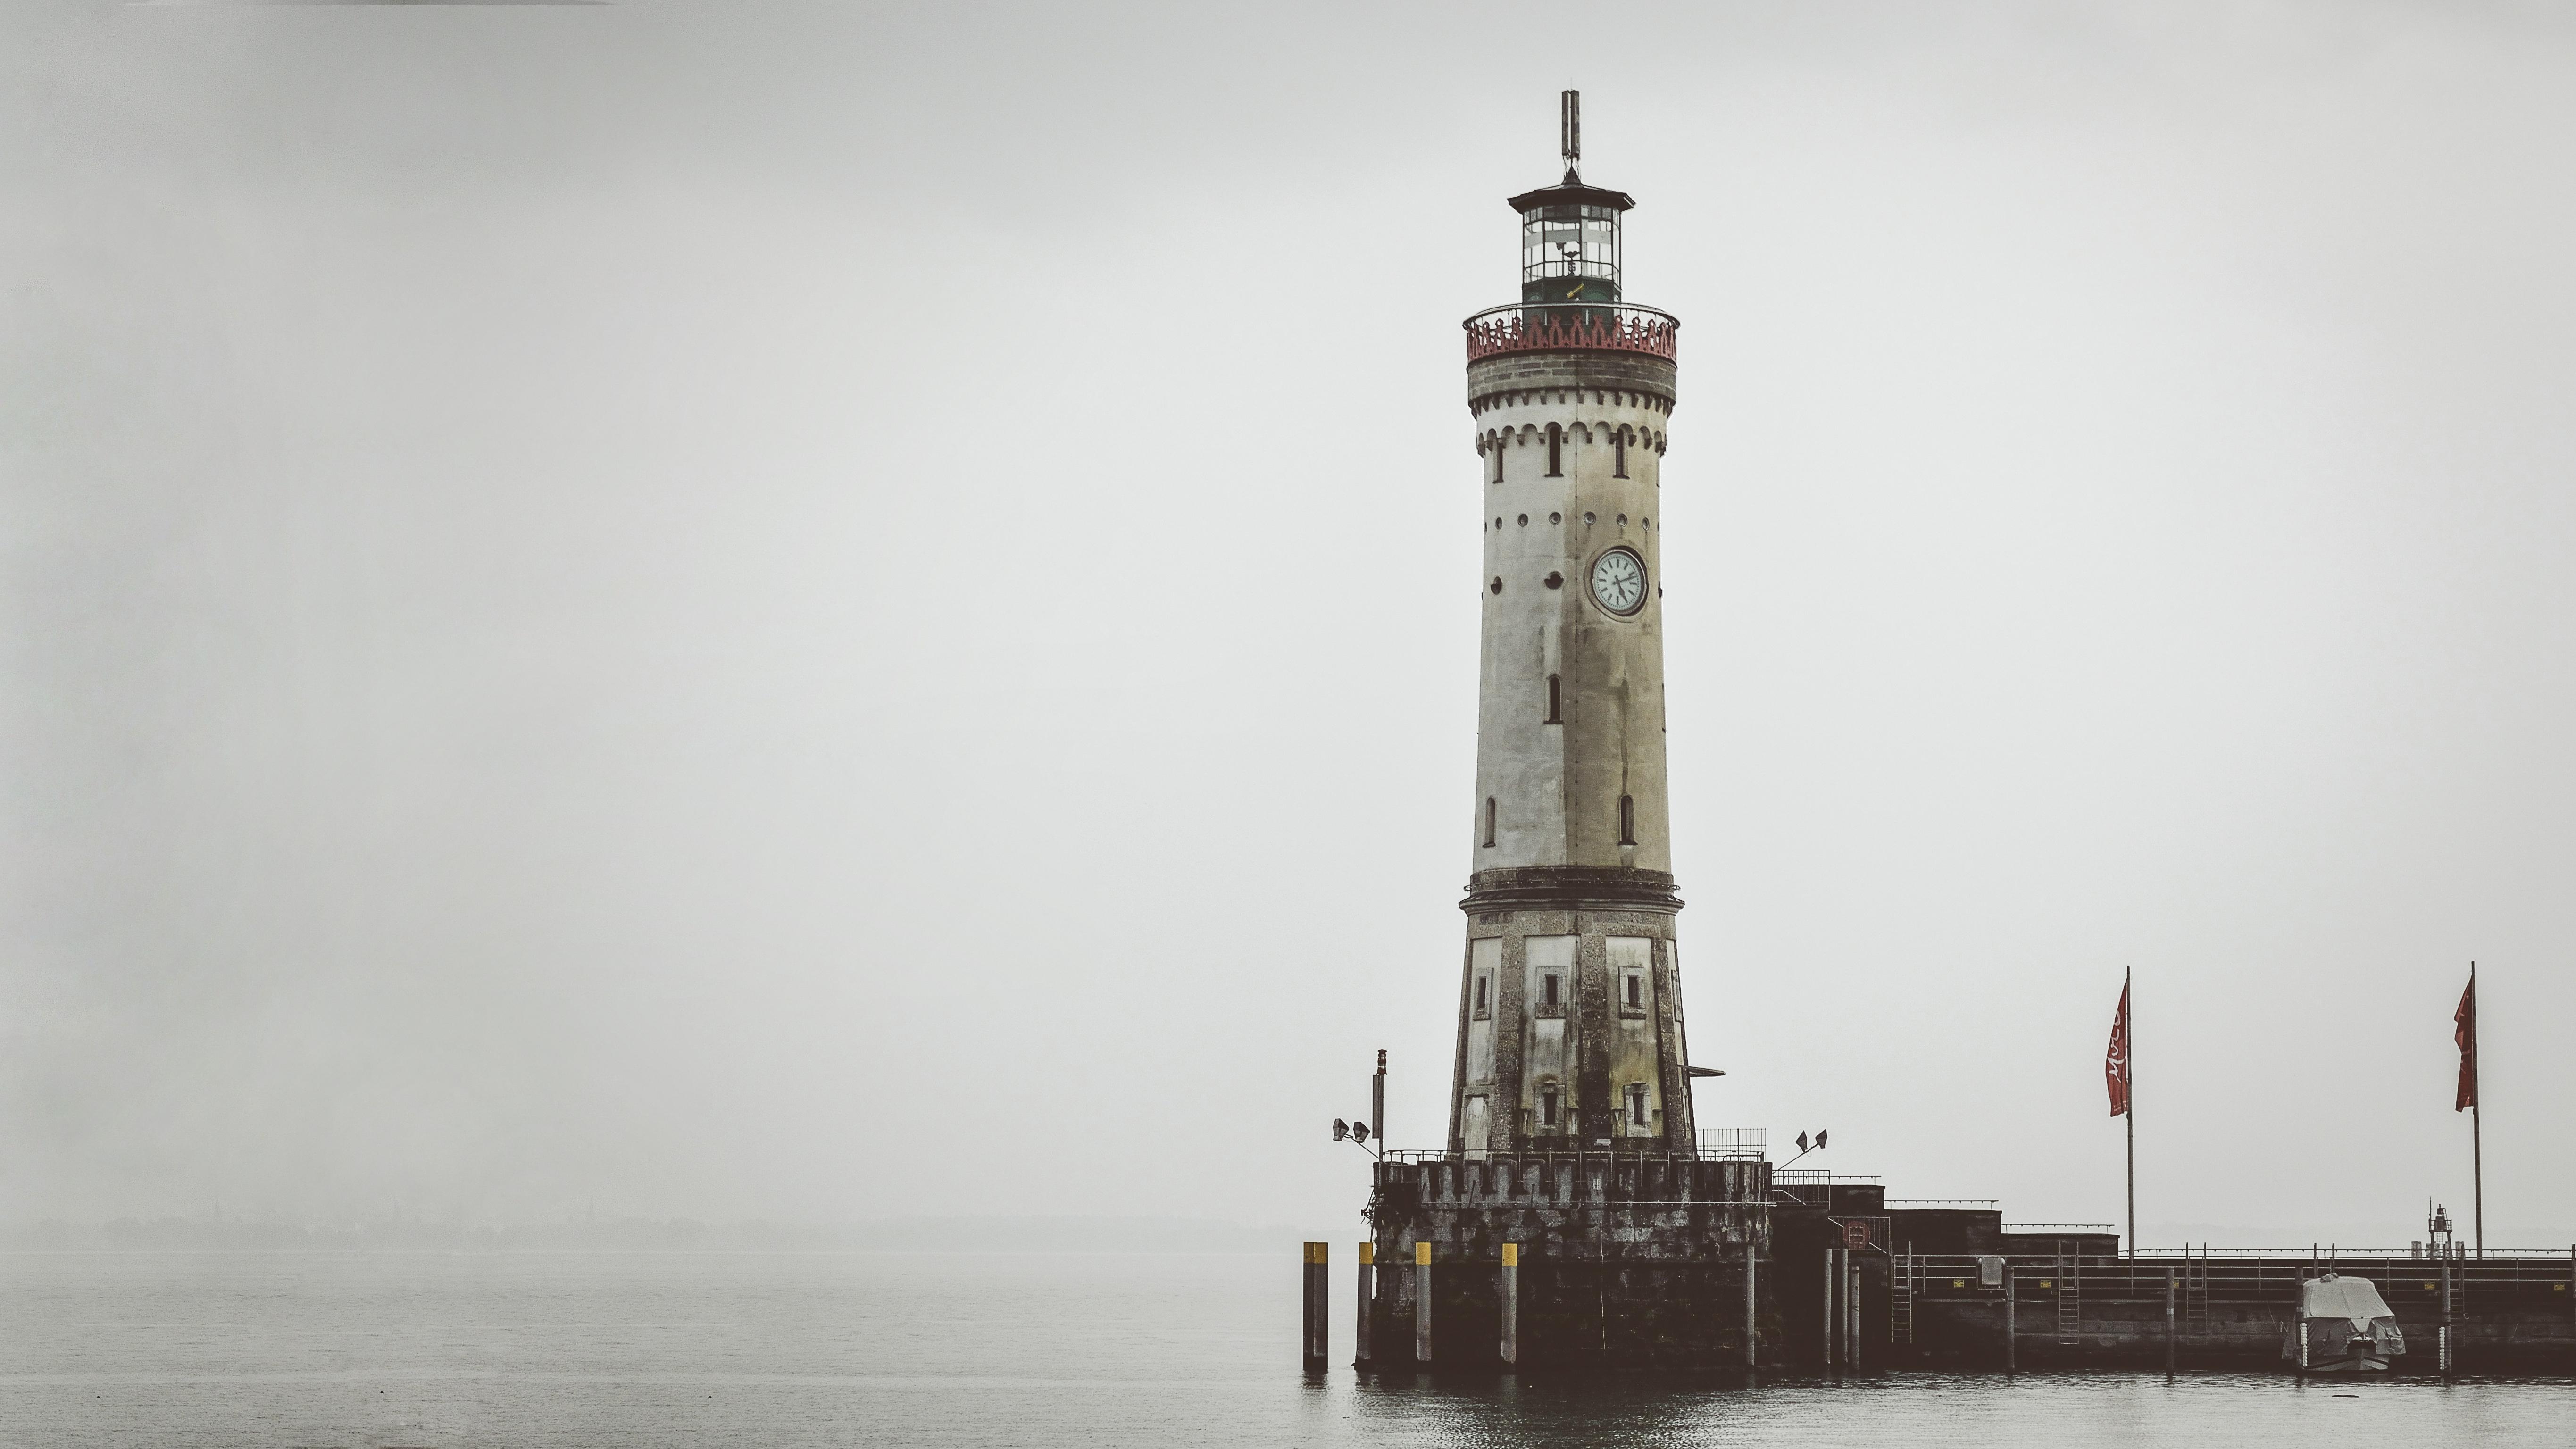 Lighthouse 4K wallpaper for your desktop or mobile screen free and easy to download